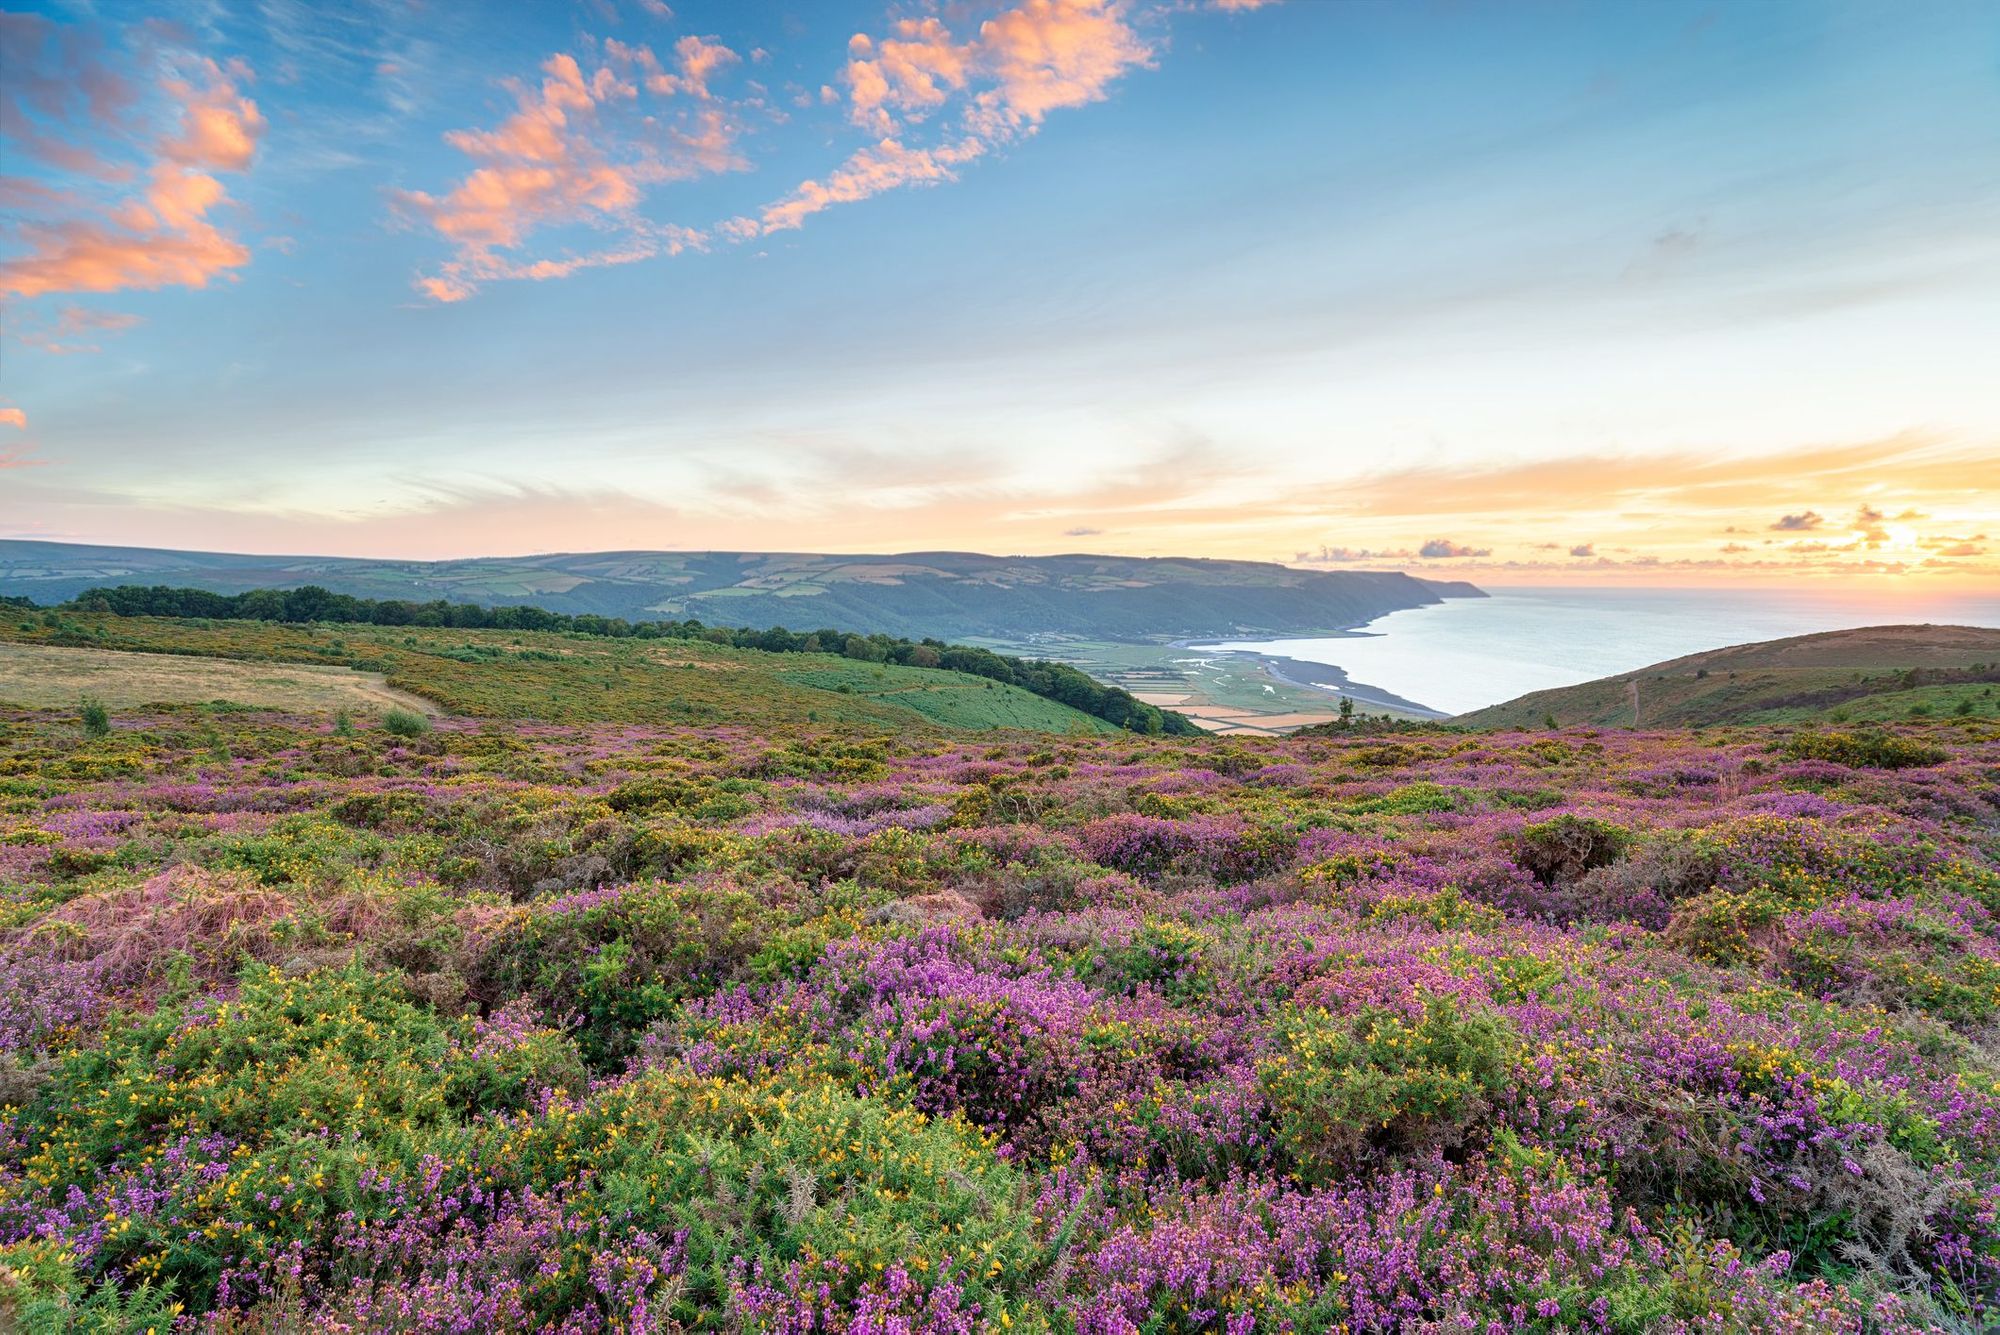 The heather-dotted moorland of Exmoor, above Minehead and the coast.